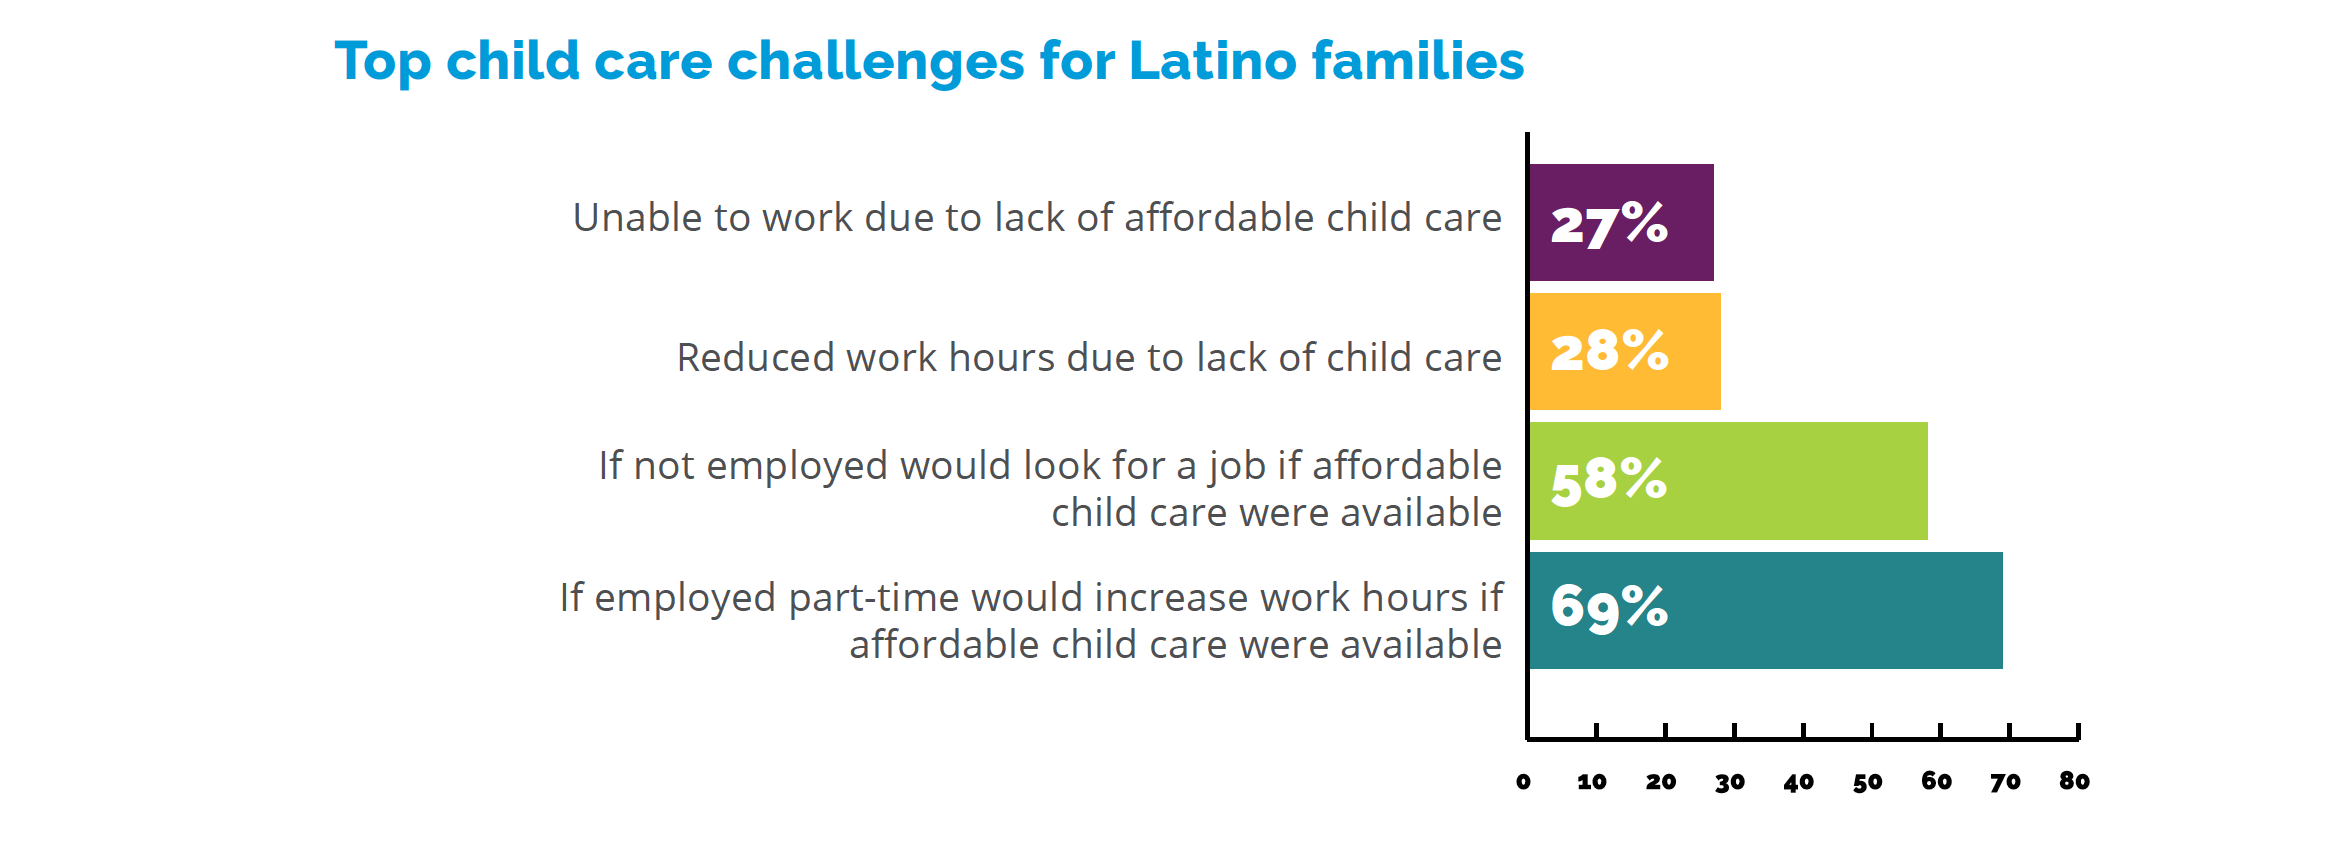 Infographic on top child care challenges for Latino families. More details available at (213) 346-3216.